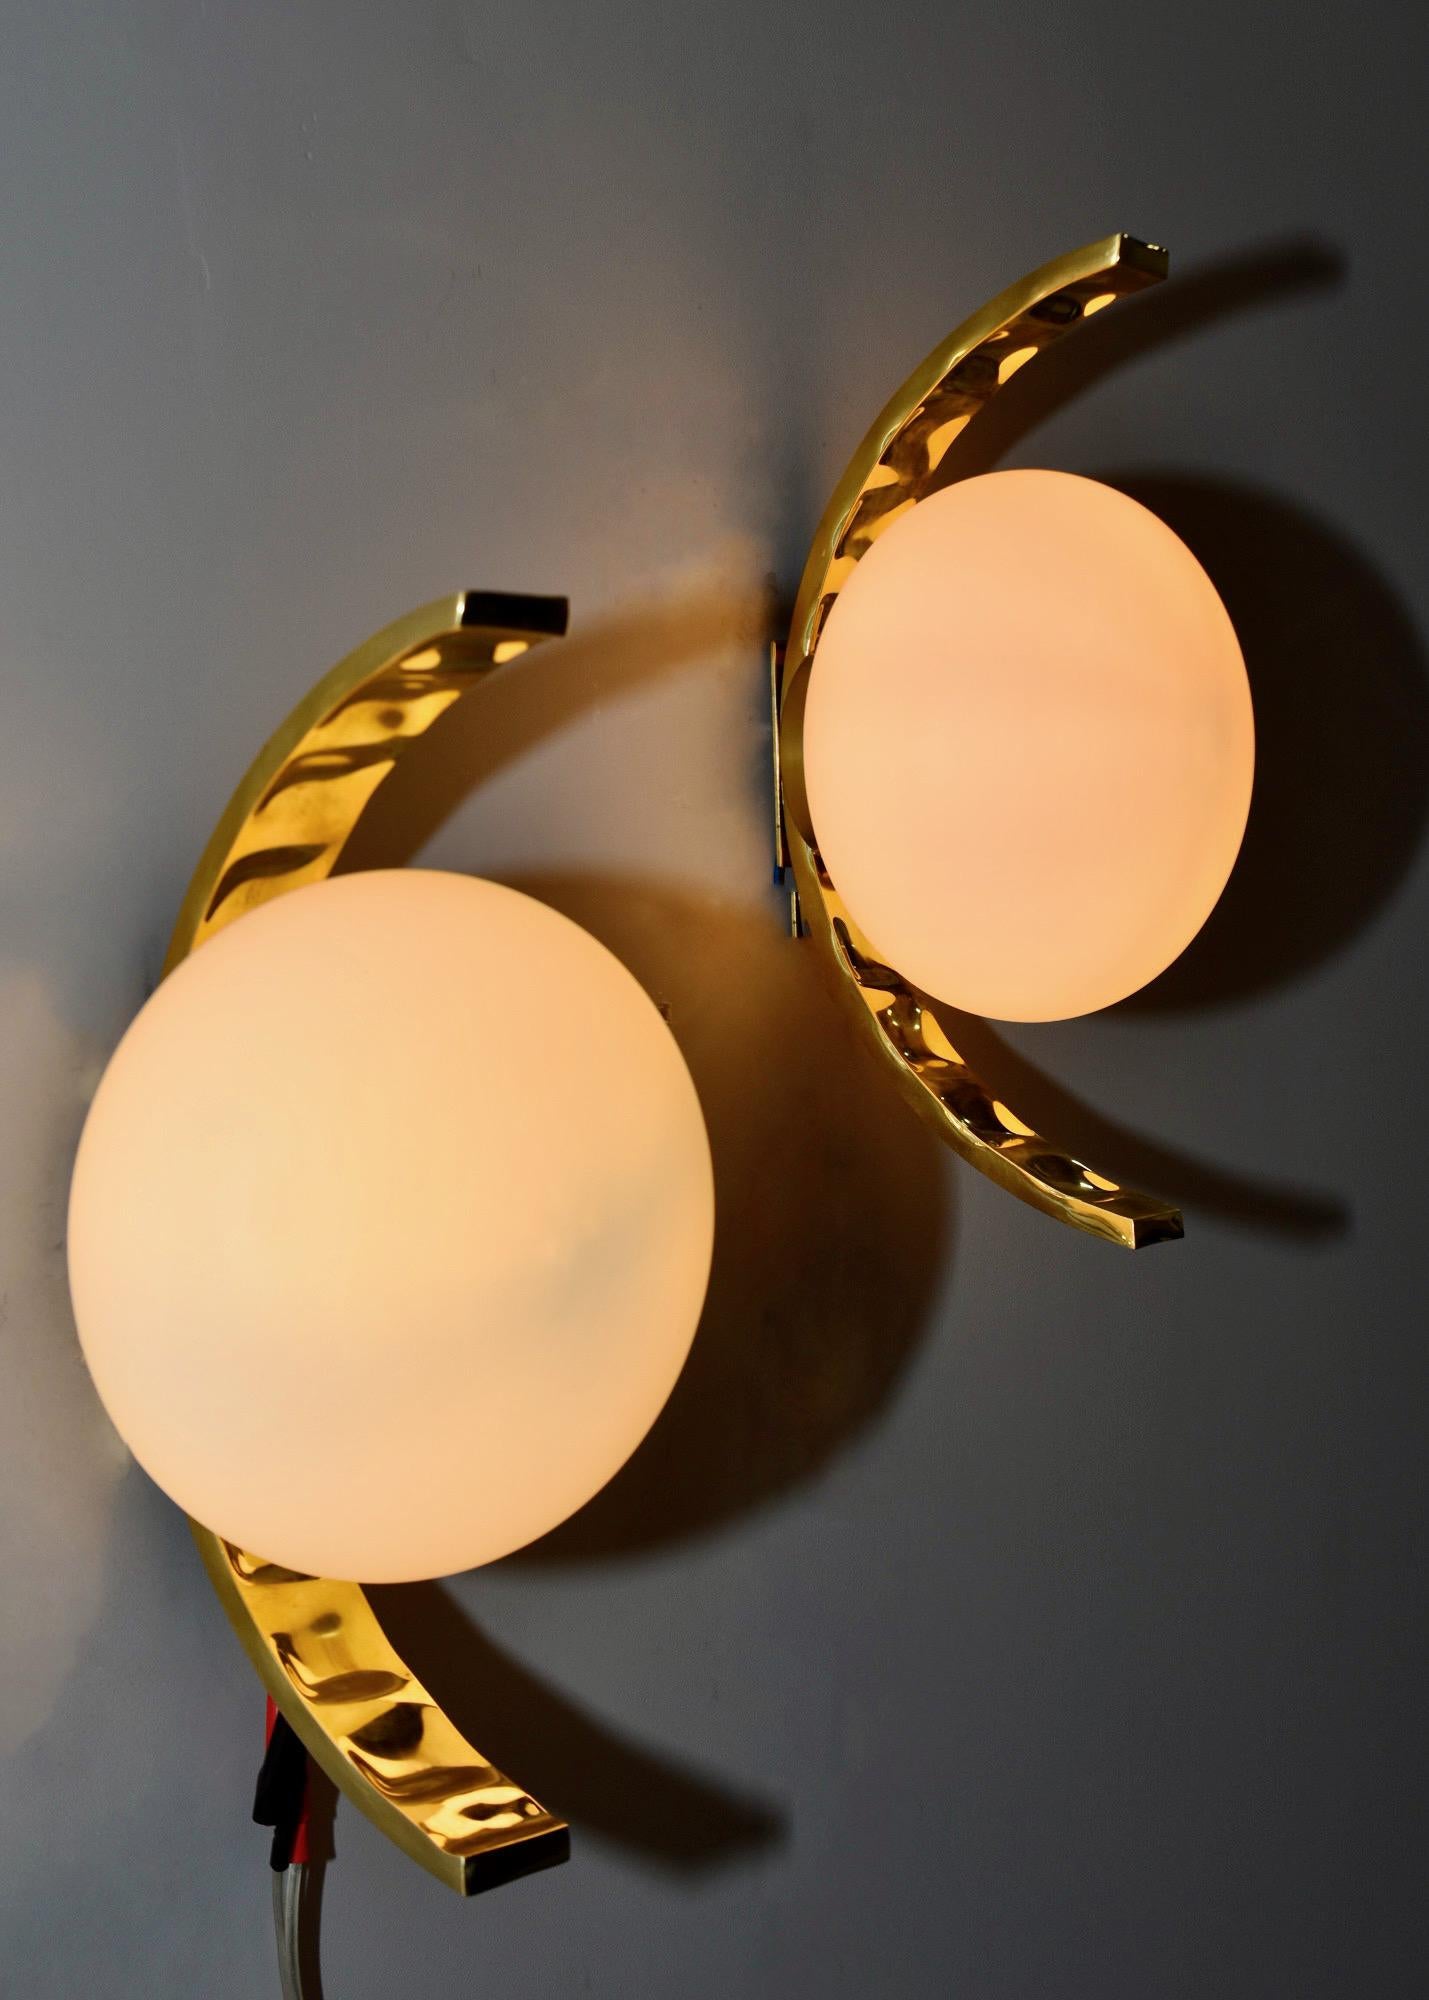 Contemporary Italian Modern Style Sconces with White Glass Globes and Brass Fittings